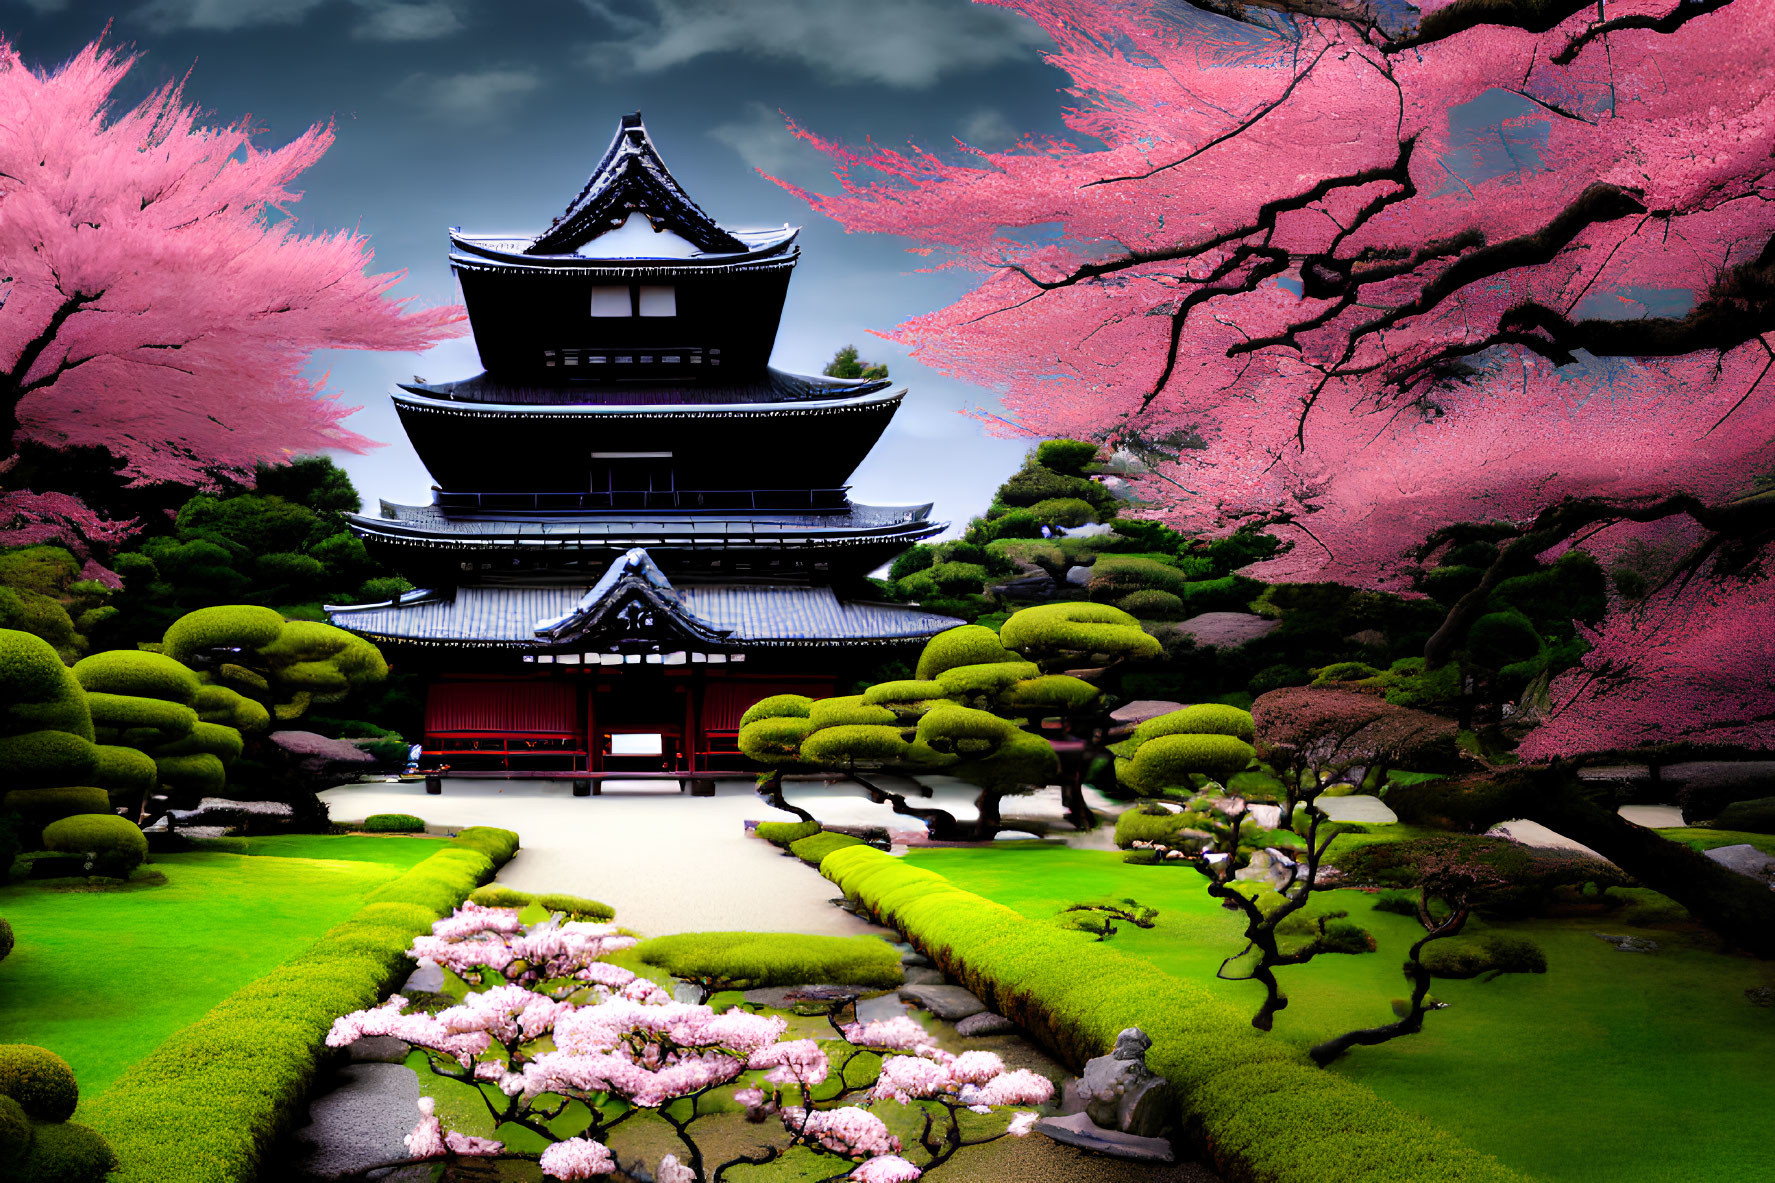 Japanese Pagoda Surrounded by Cherry Blossoms and Manicured Garden